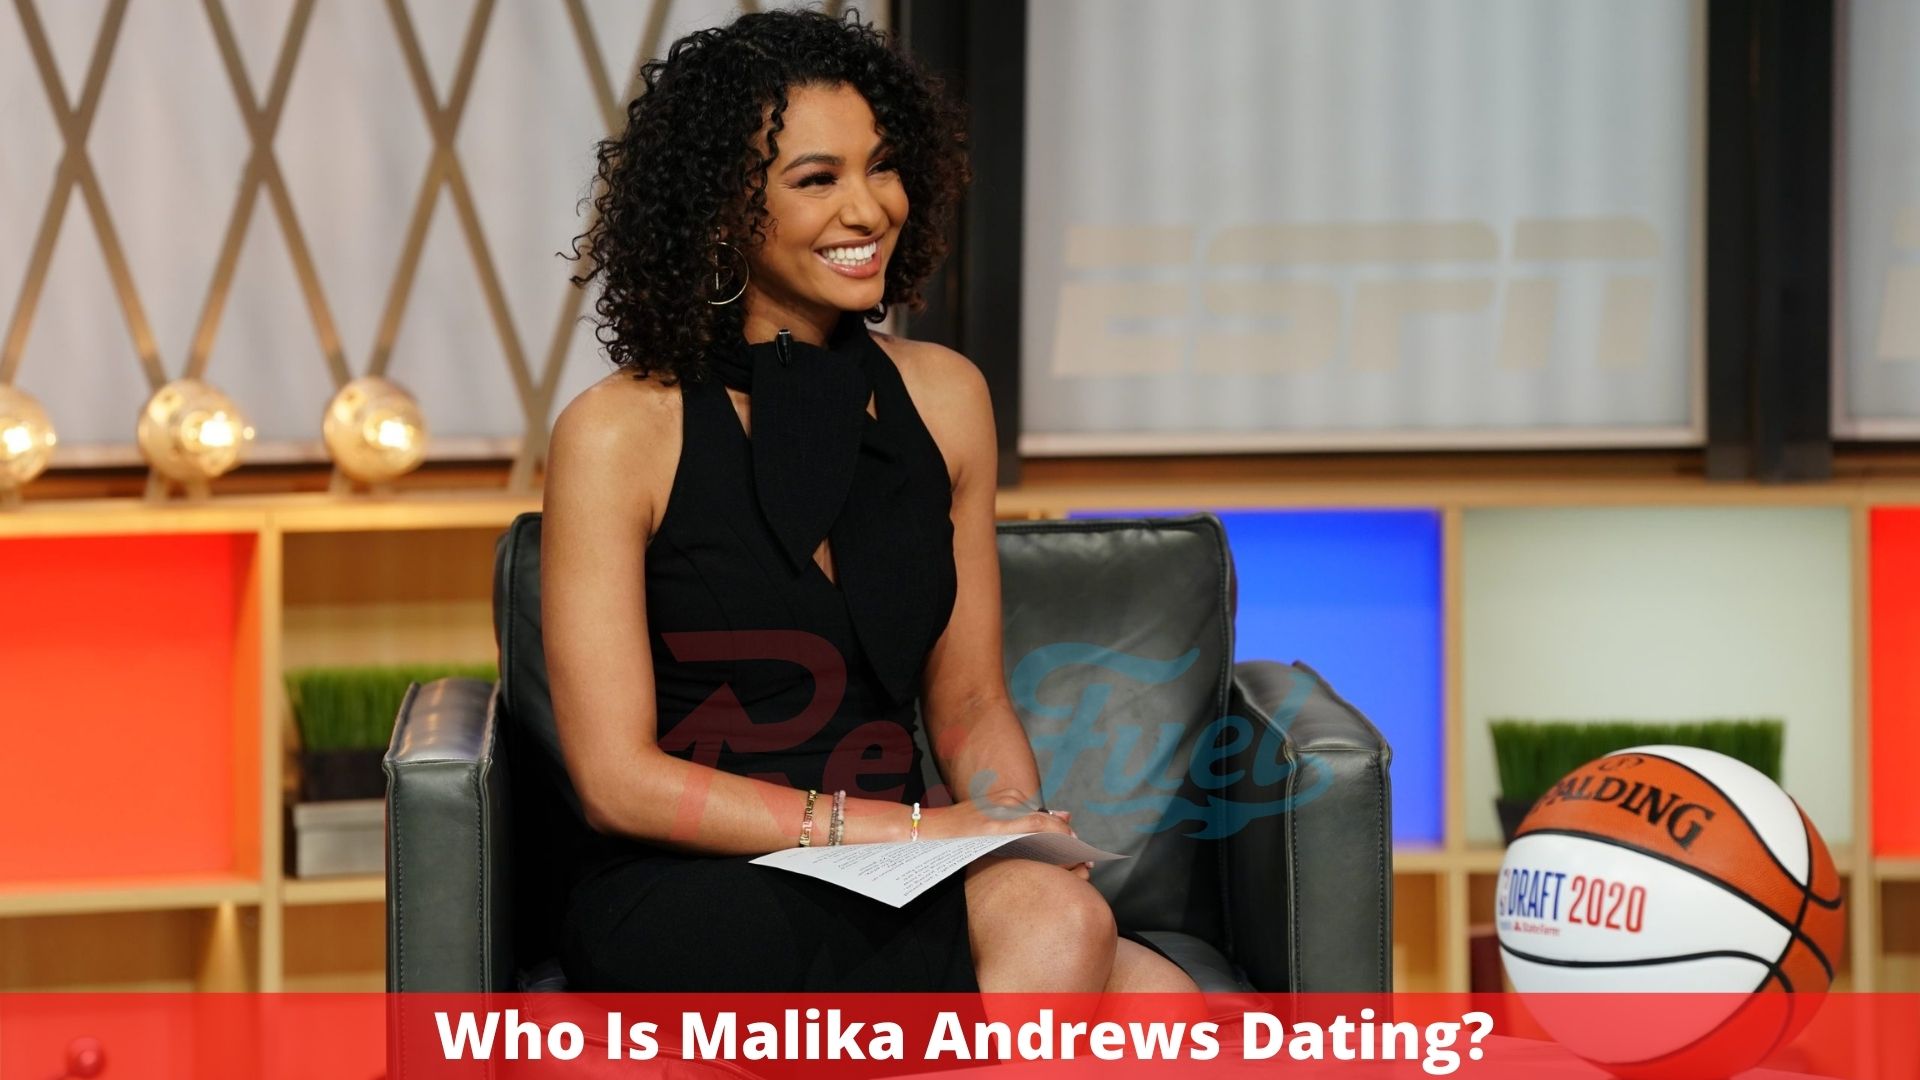 Who Is Malika Andrews Dating?